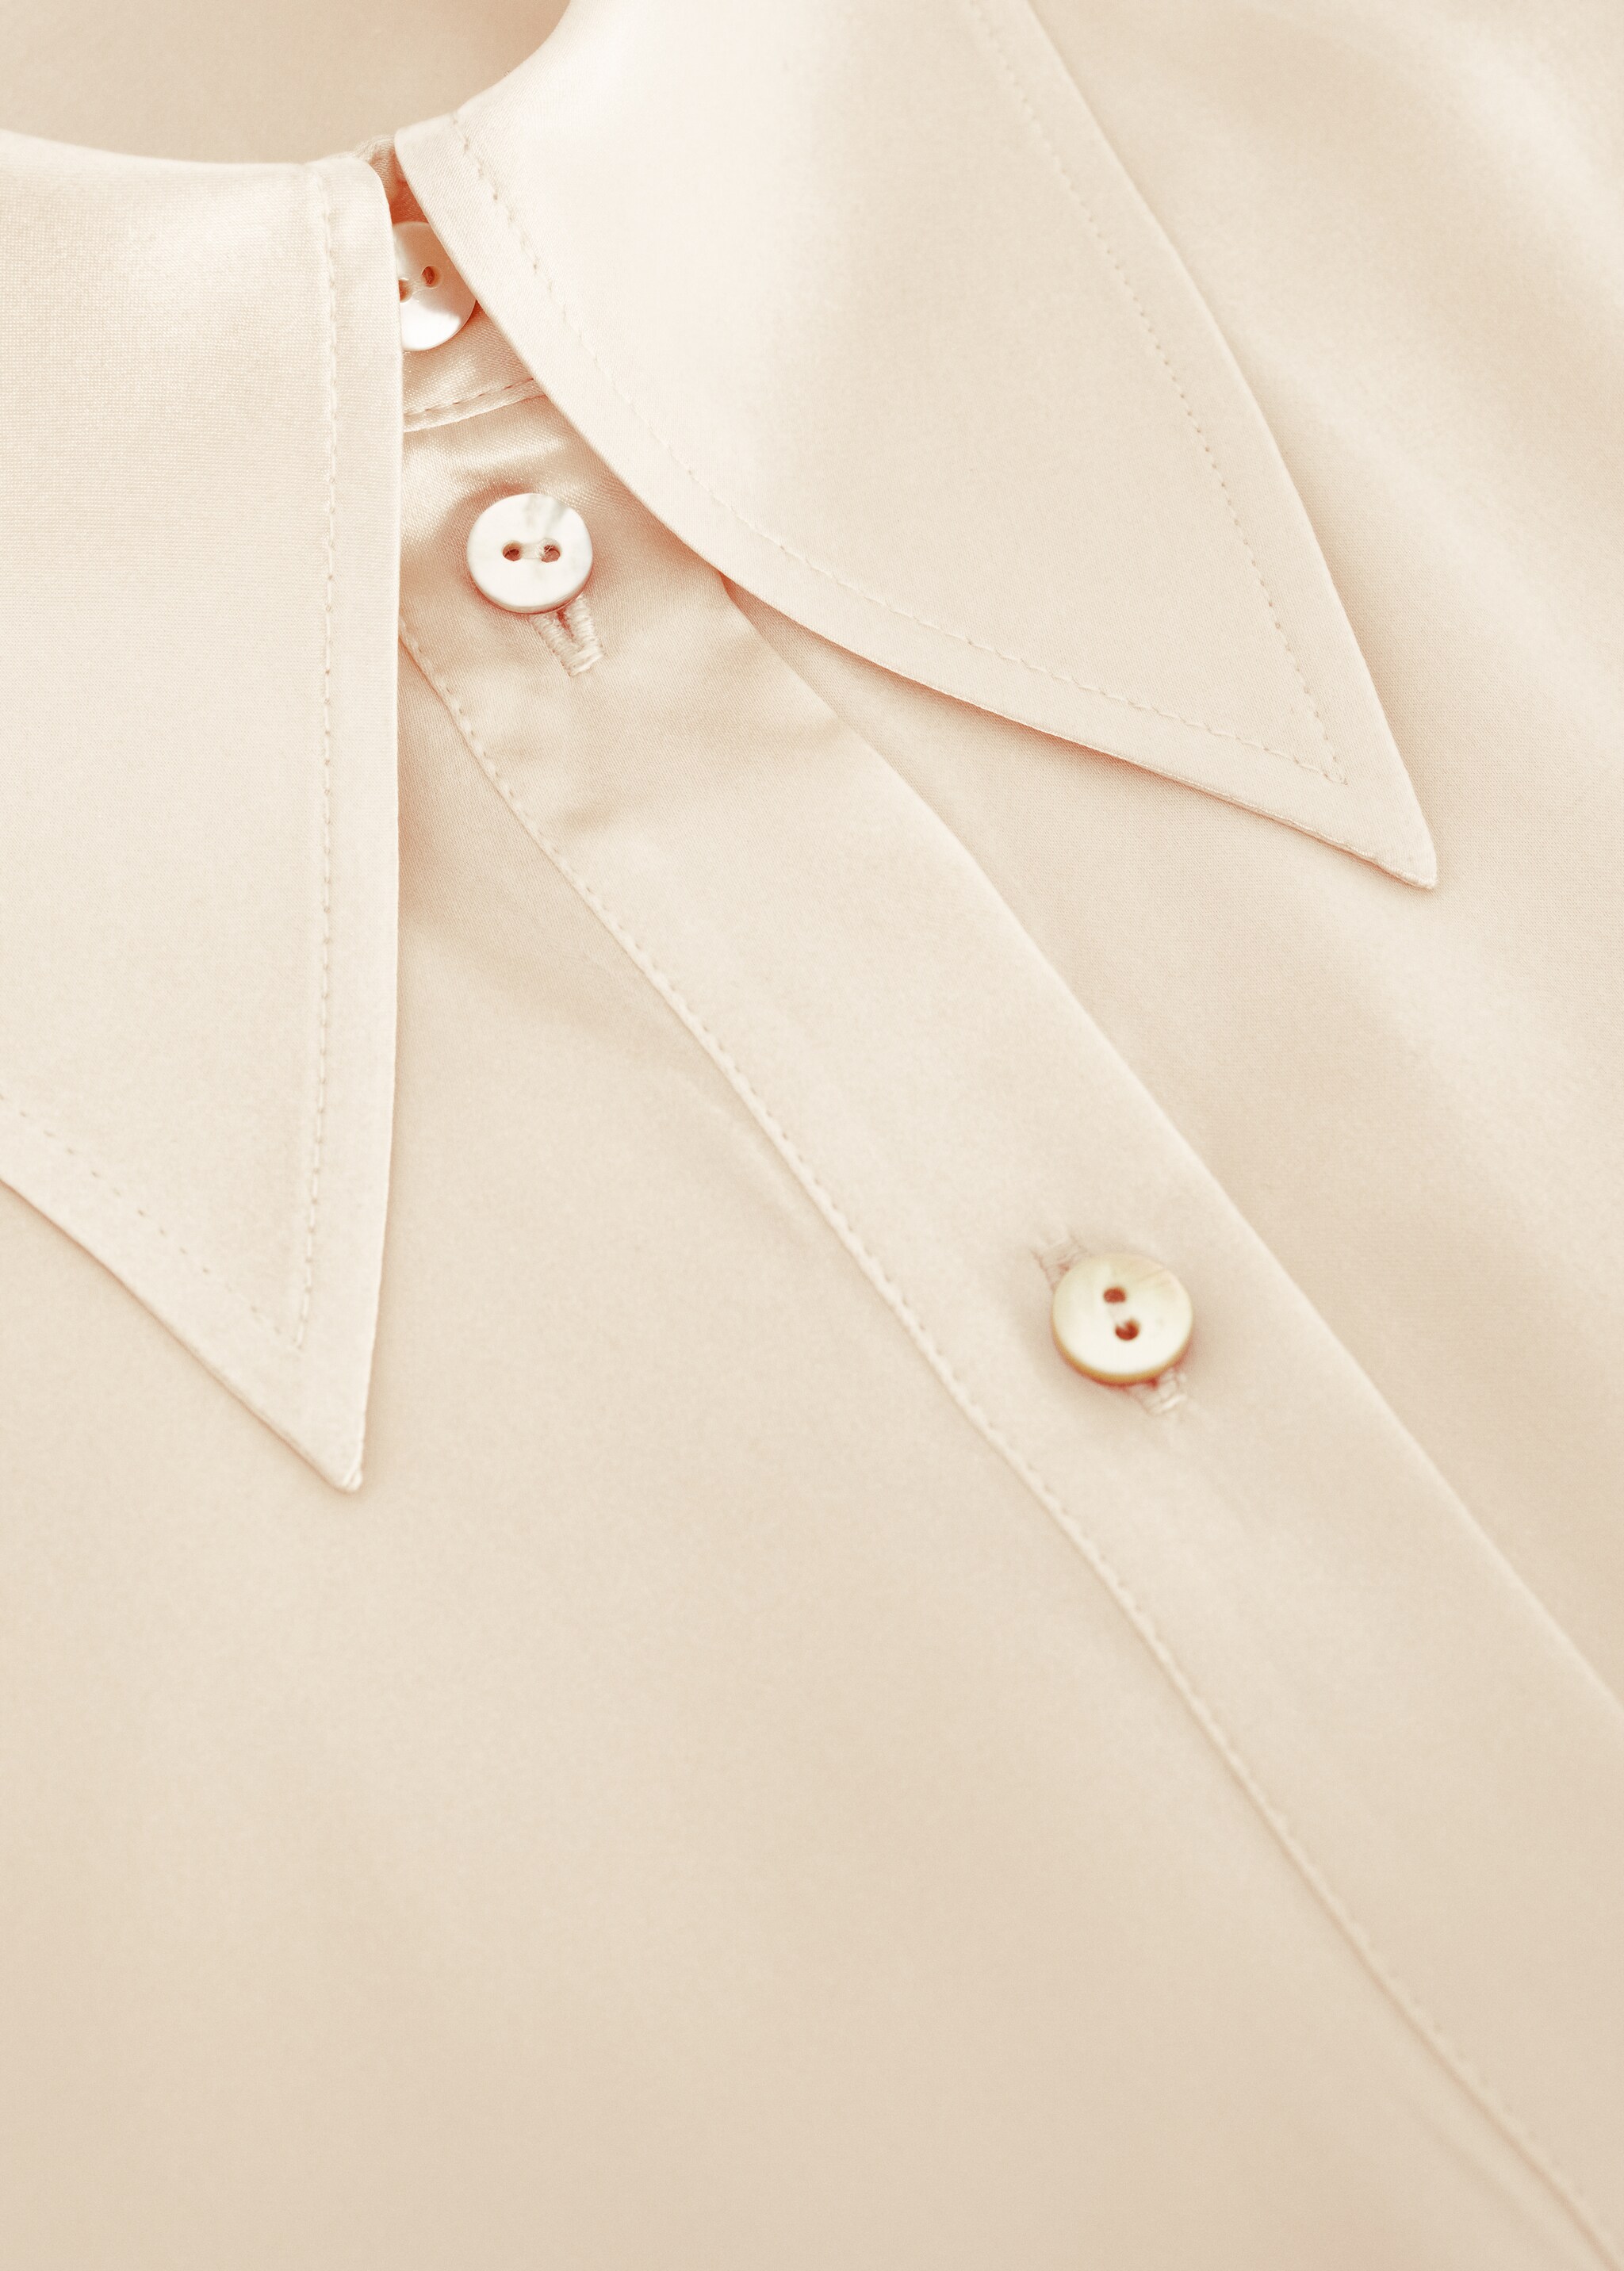 Silk shirt with side drape - Details of the article 8